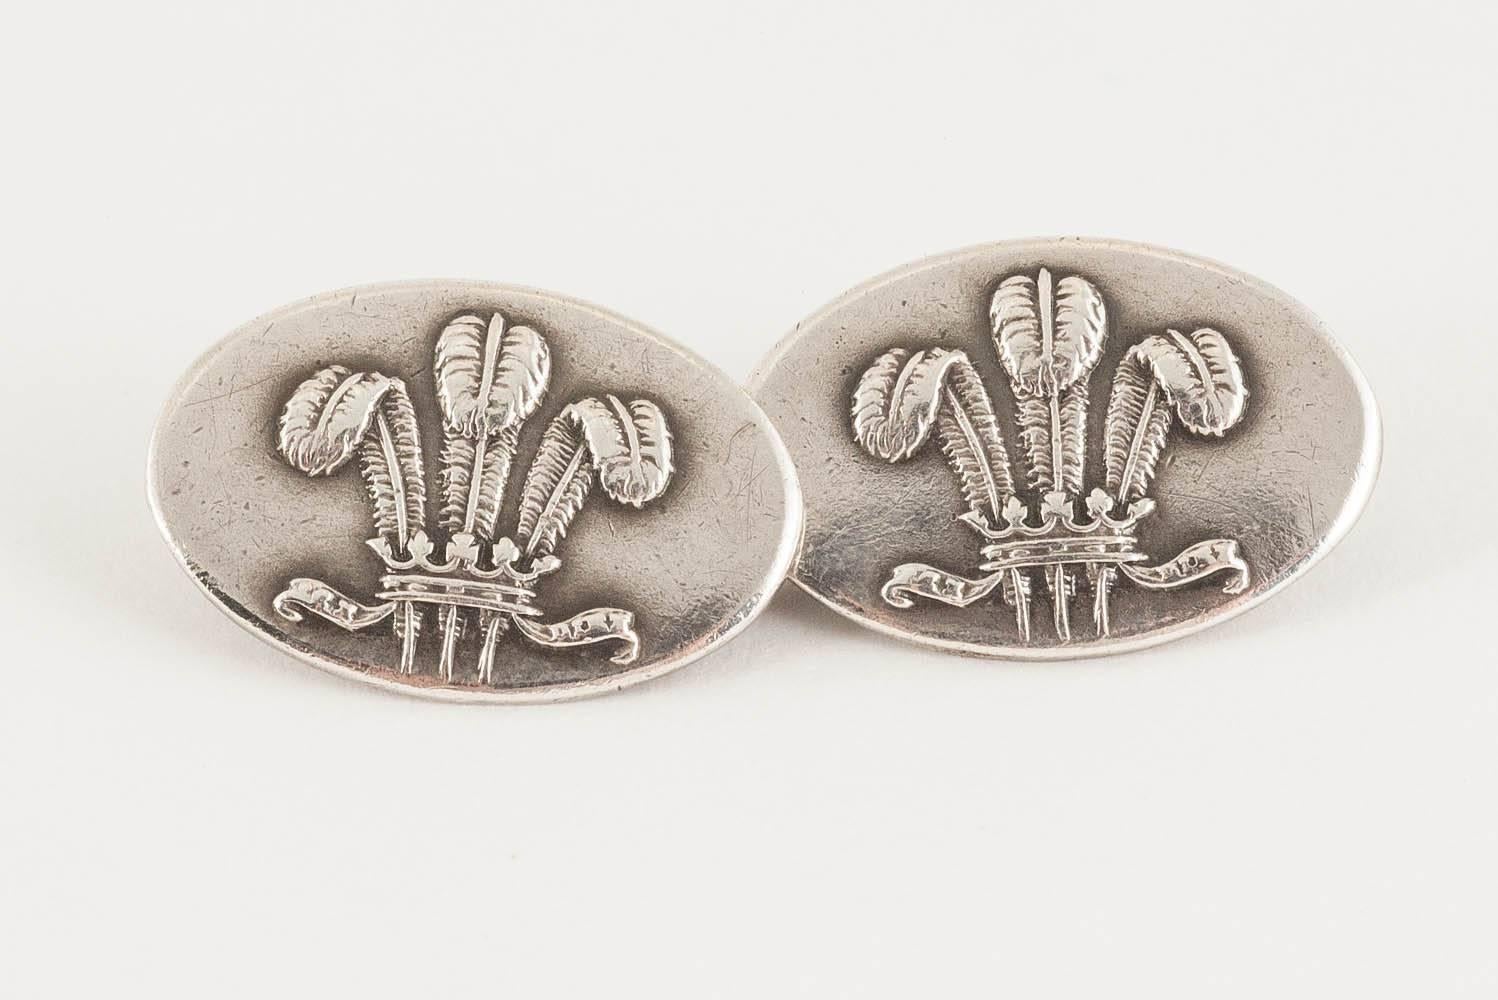 Pair of oval, double sided silver cufflinks,with the Prince of Wales feathers in a raised design,hallmarked for Chester 1962 . Size 12 x 19 mm